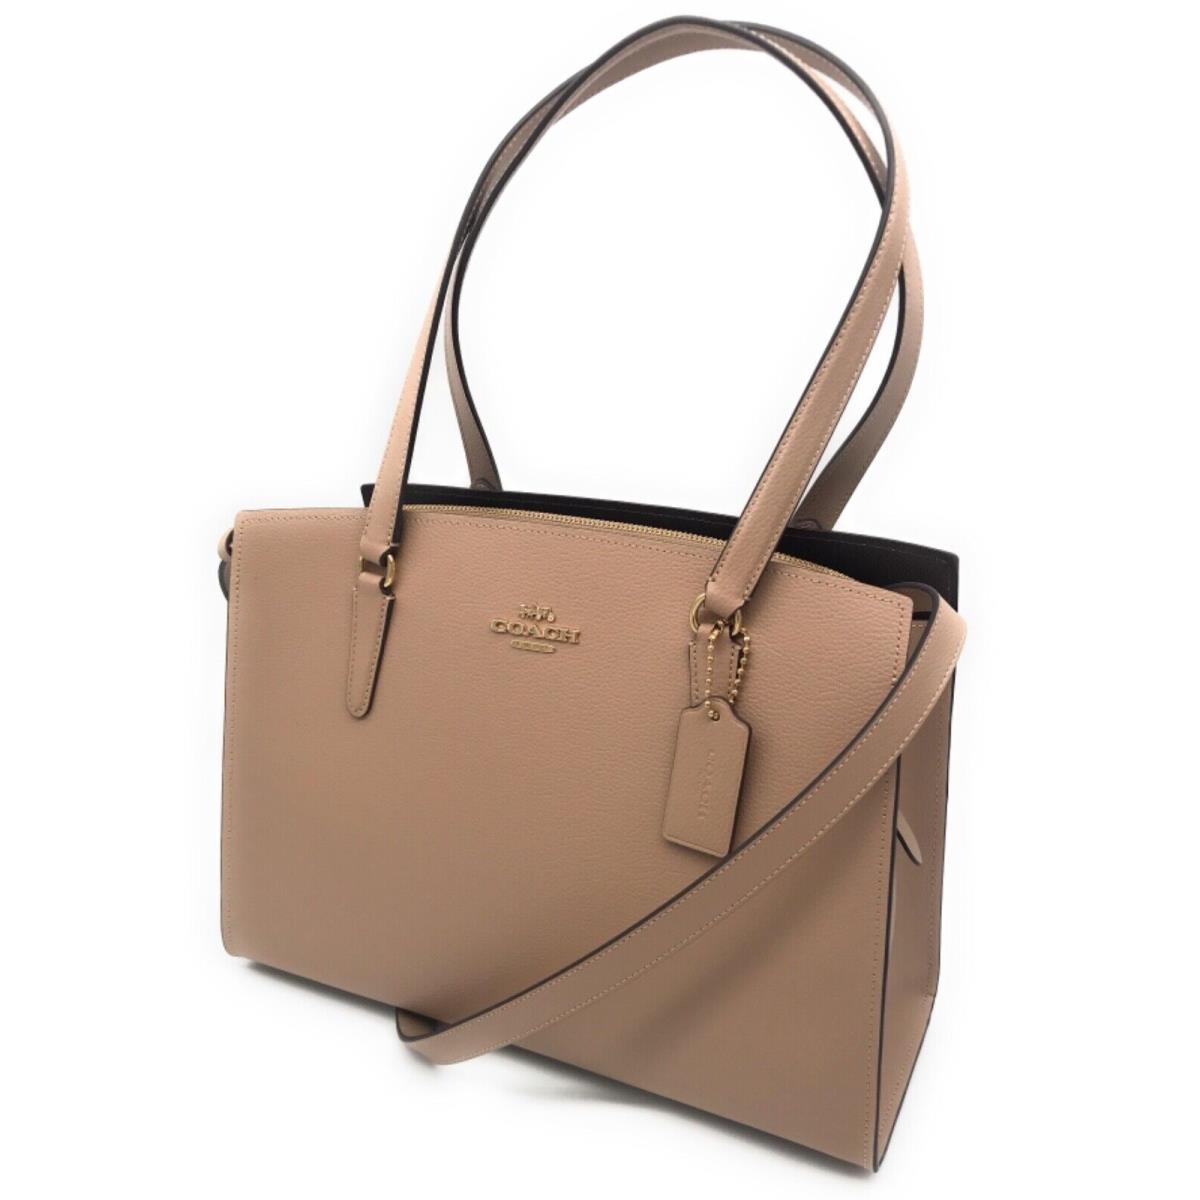 Coach Tatum Large Leather Carryall Tote Shoulder Bag Taupe - Exterior: